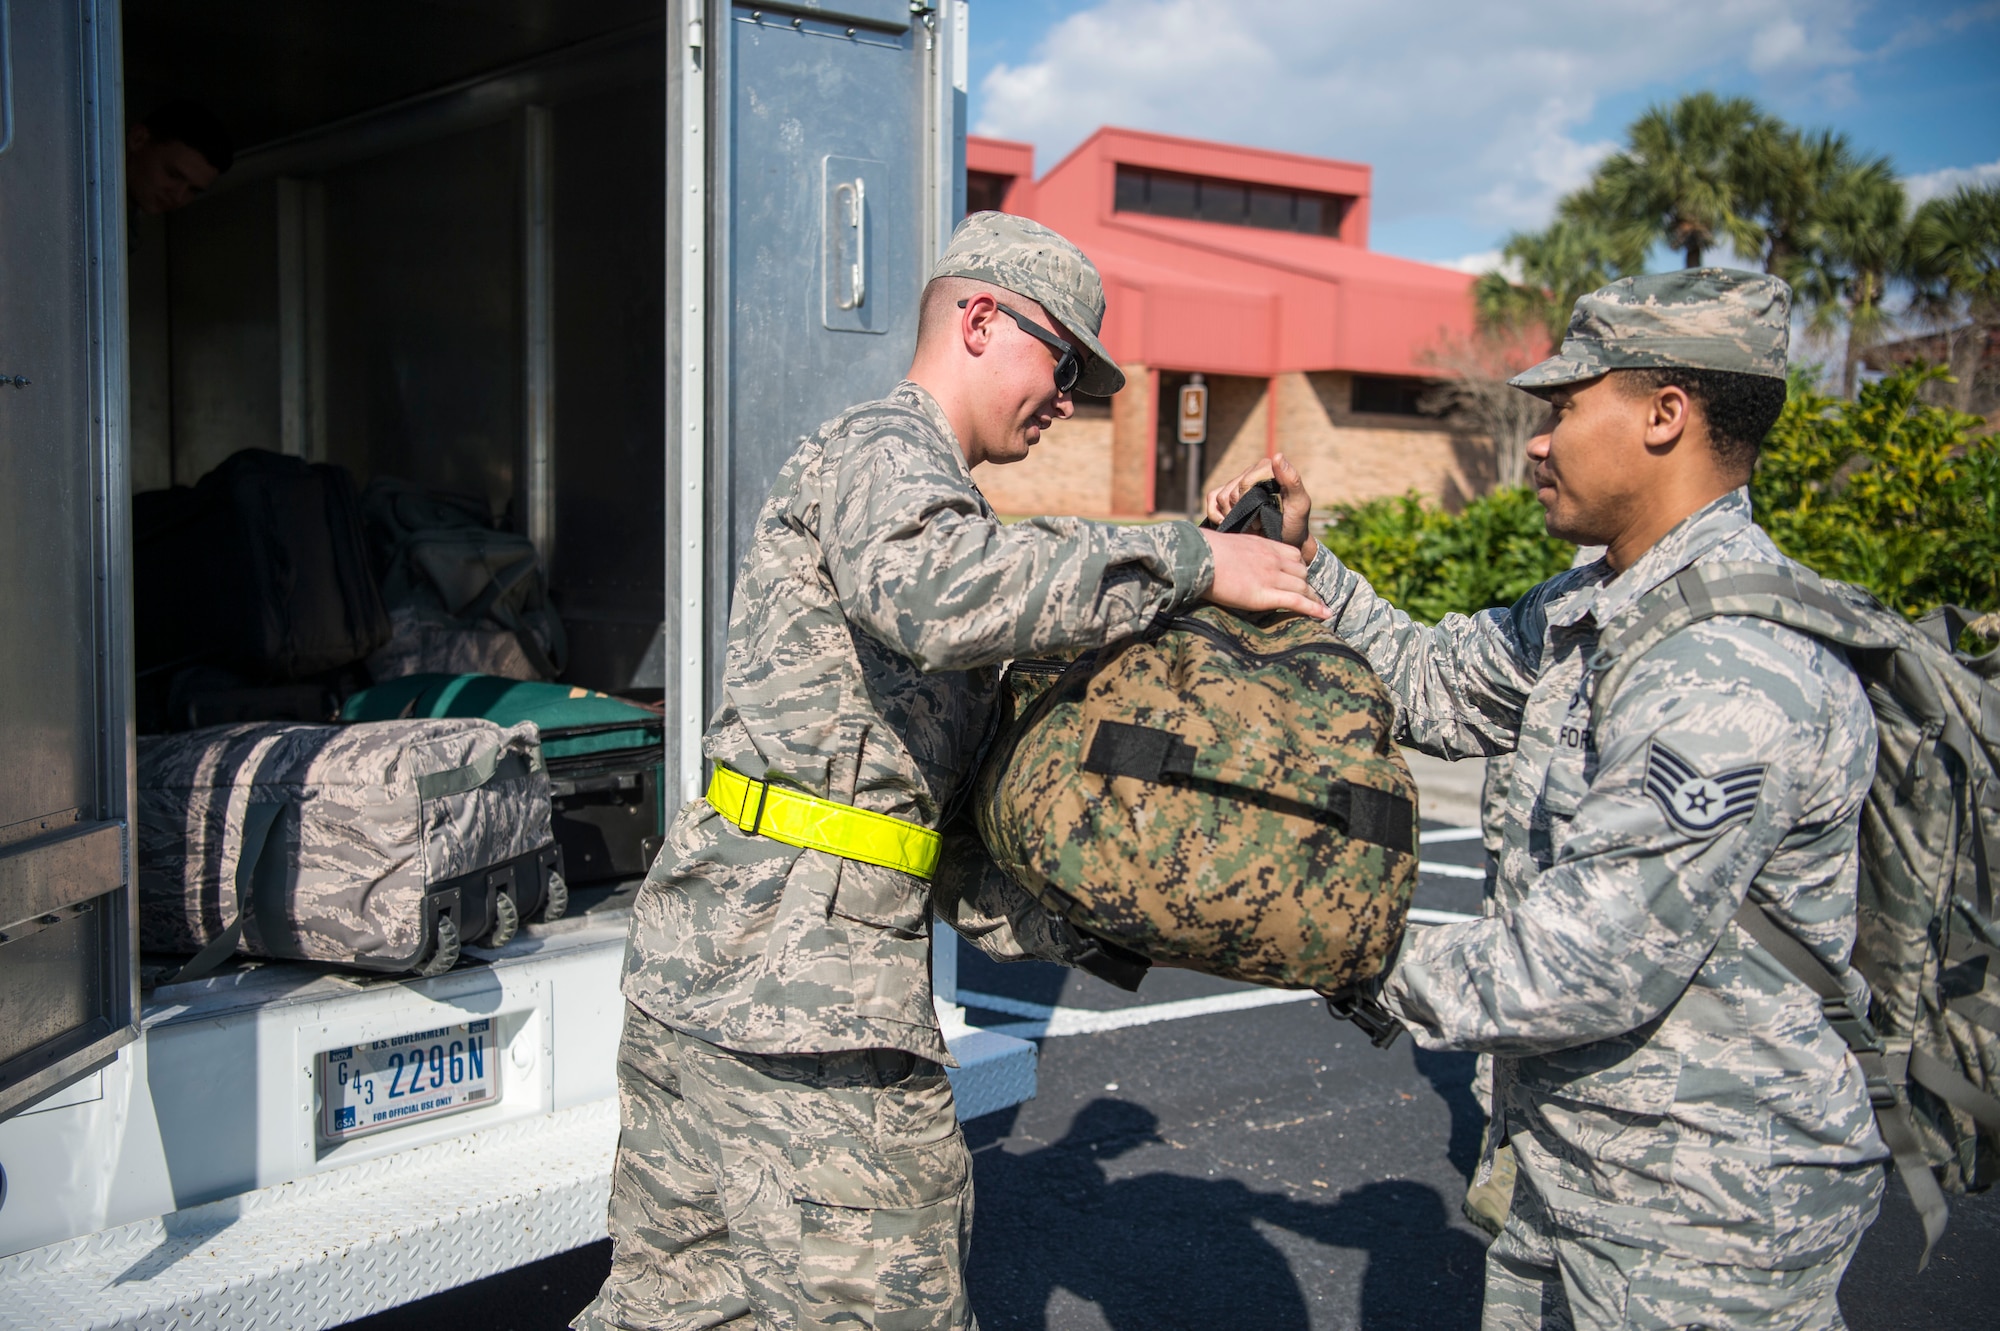 A 6th Logistics Readiness Squadron Airman assists a simulated deployer with their luggage during an operational readiness exercise at MacDill Air Force Base, Fla., Feb. 8, 2019. Total force Airmen from the 6th Air Mobility Wing and 927th Air Refueling Wing participated in the three-day exercise designed to emphasize the importance of combat skills effectiveness training and ensure Airmen are prepared for any potential contingencies.